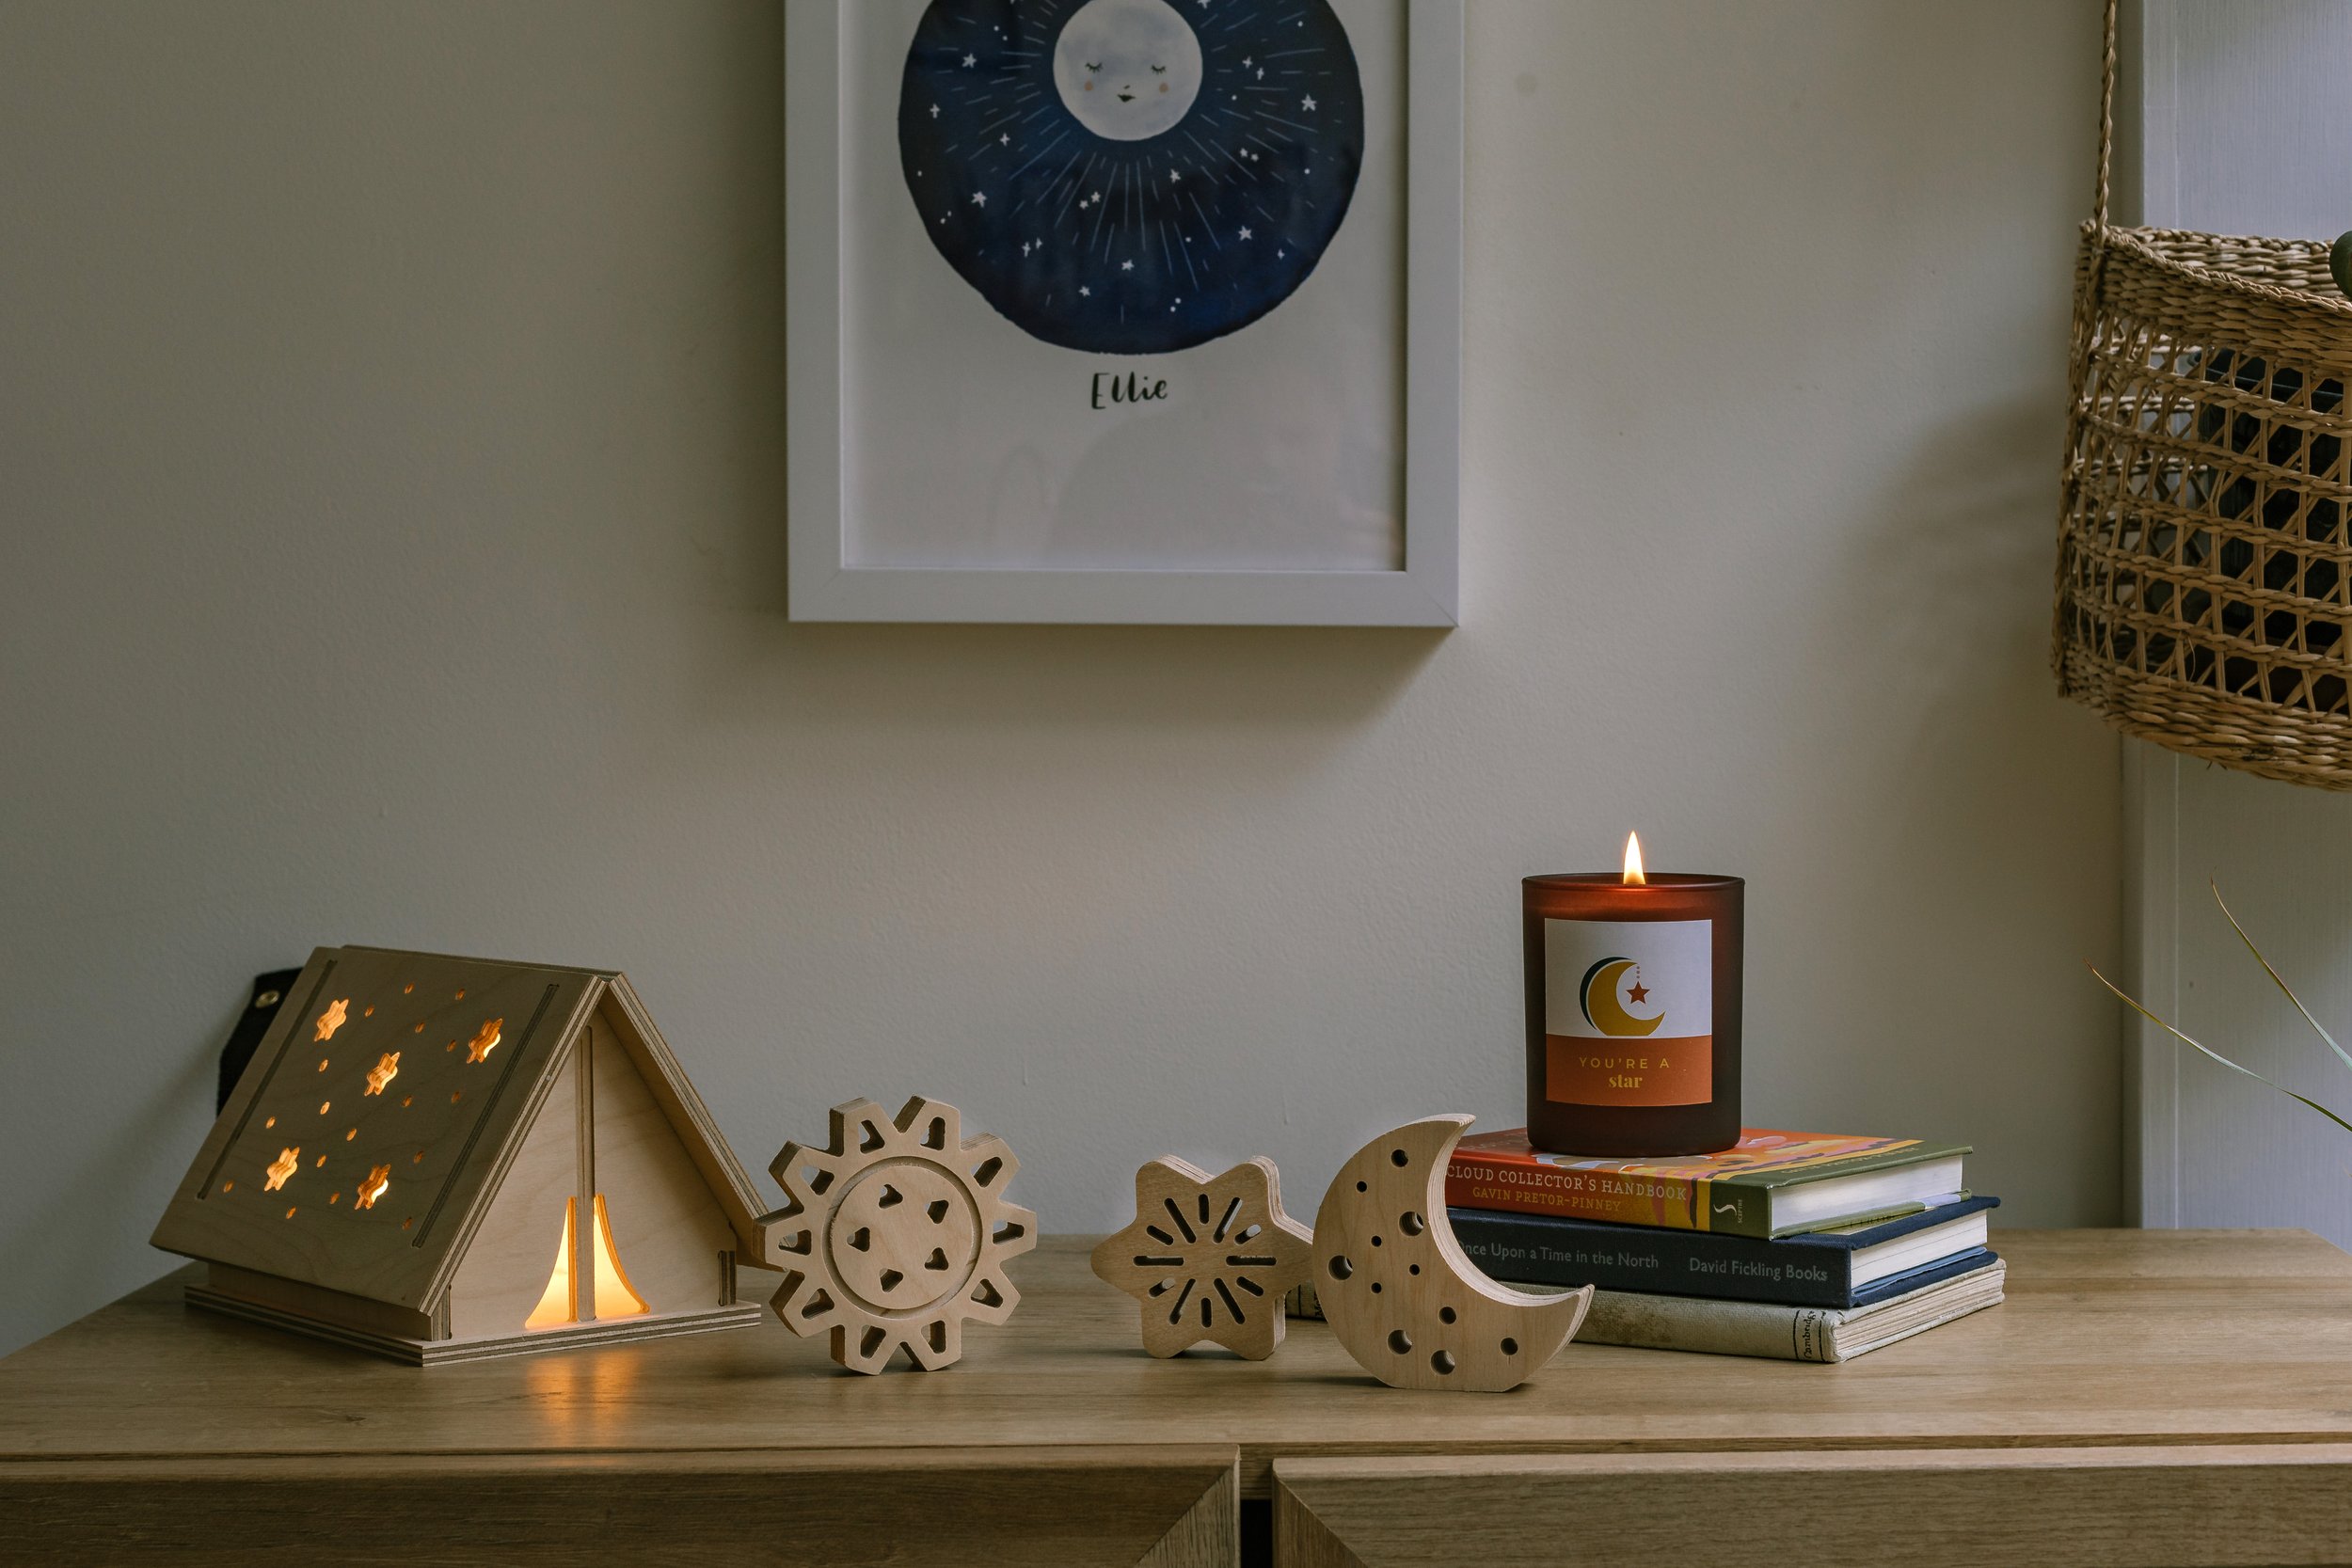 tabletop with plywood tent-shaped light, wooden decorations, books and candle